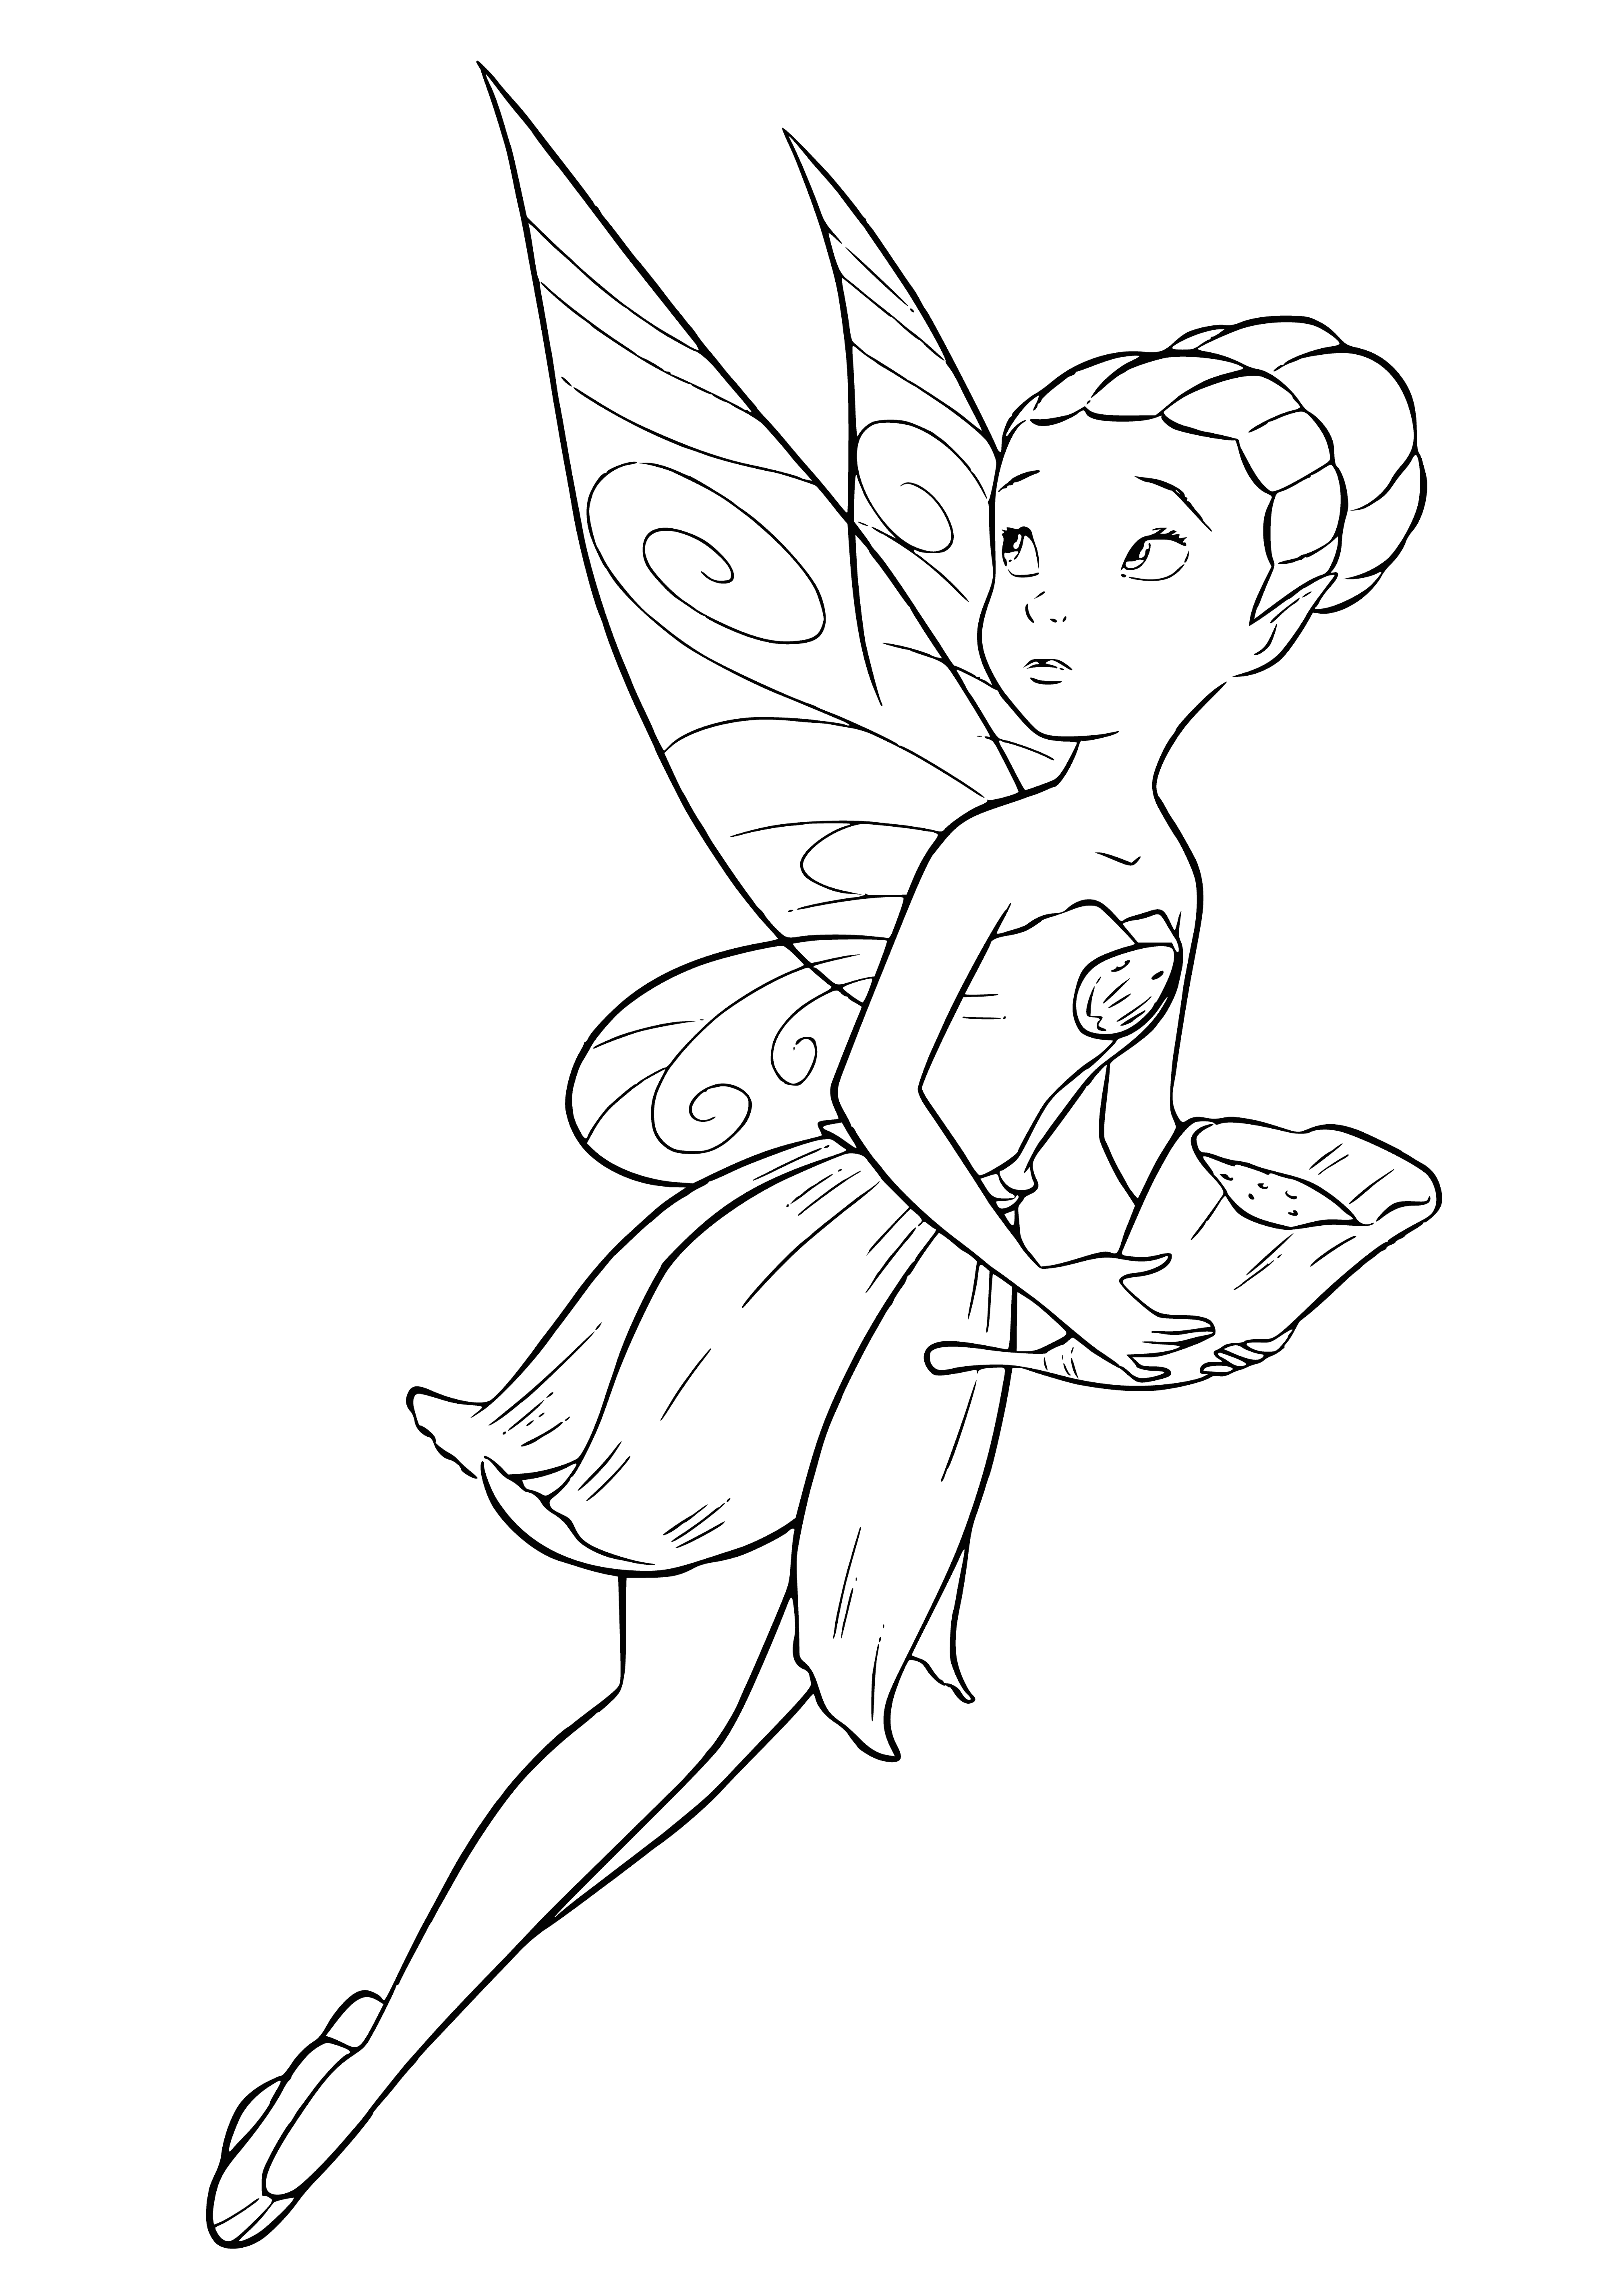 Fairy of the Light of Iridescence coloring page